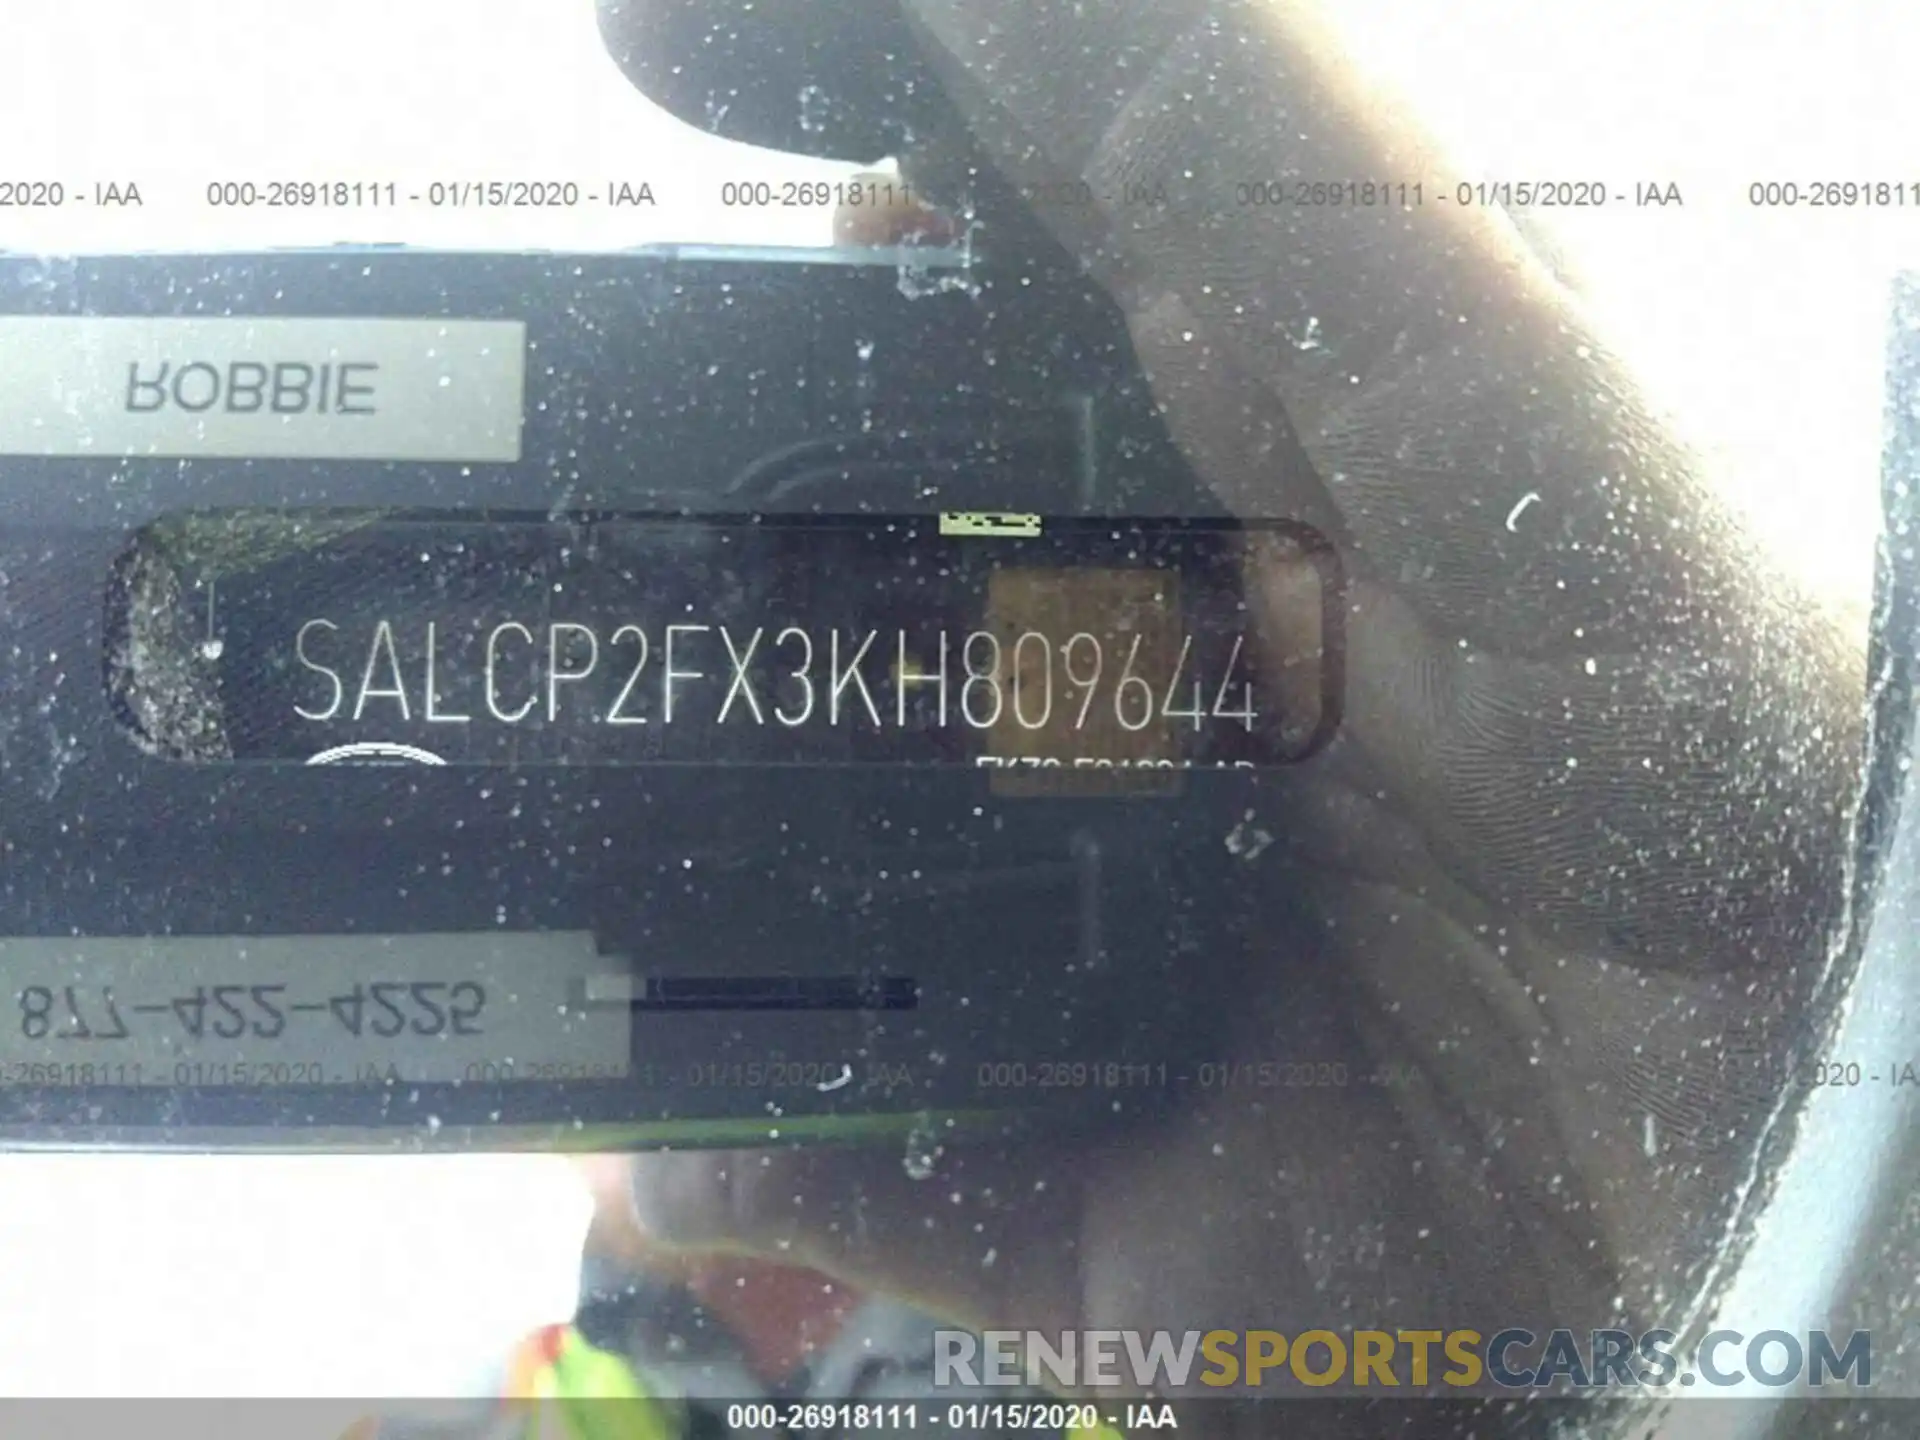 9 Photograph of a damaged car SALCP2FX3KH809644 LAND ROVER DISCOVERY SPORT 2019